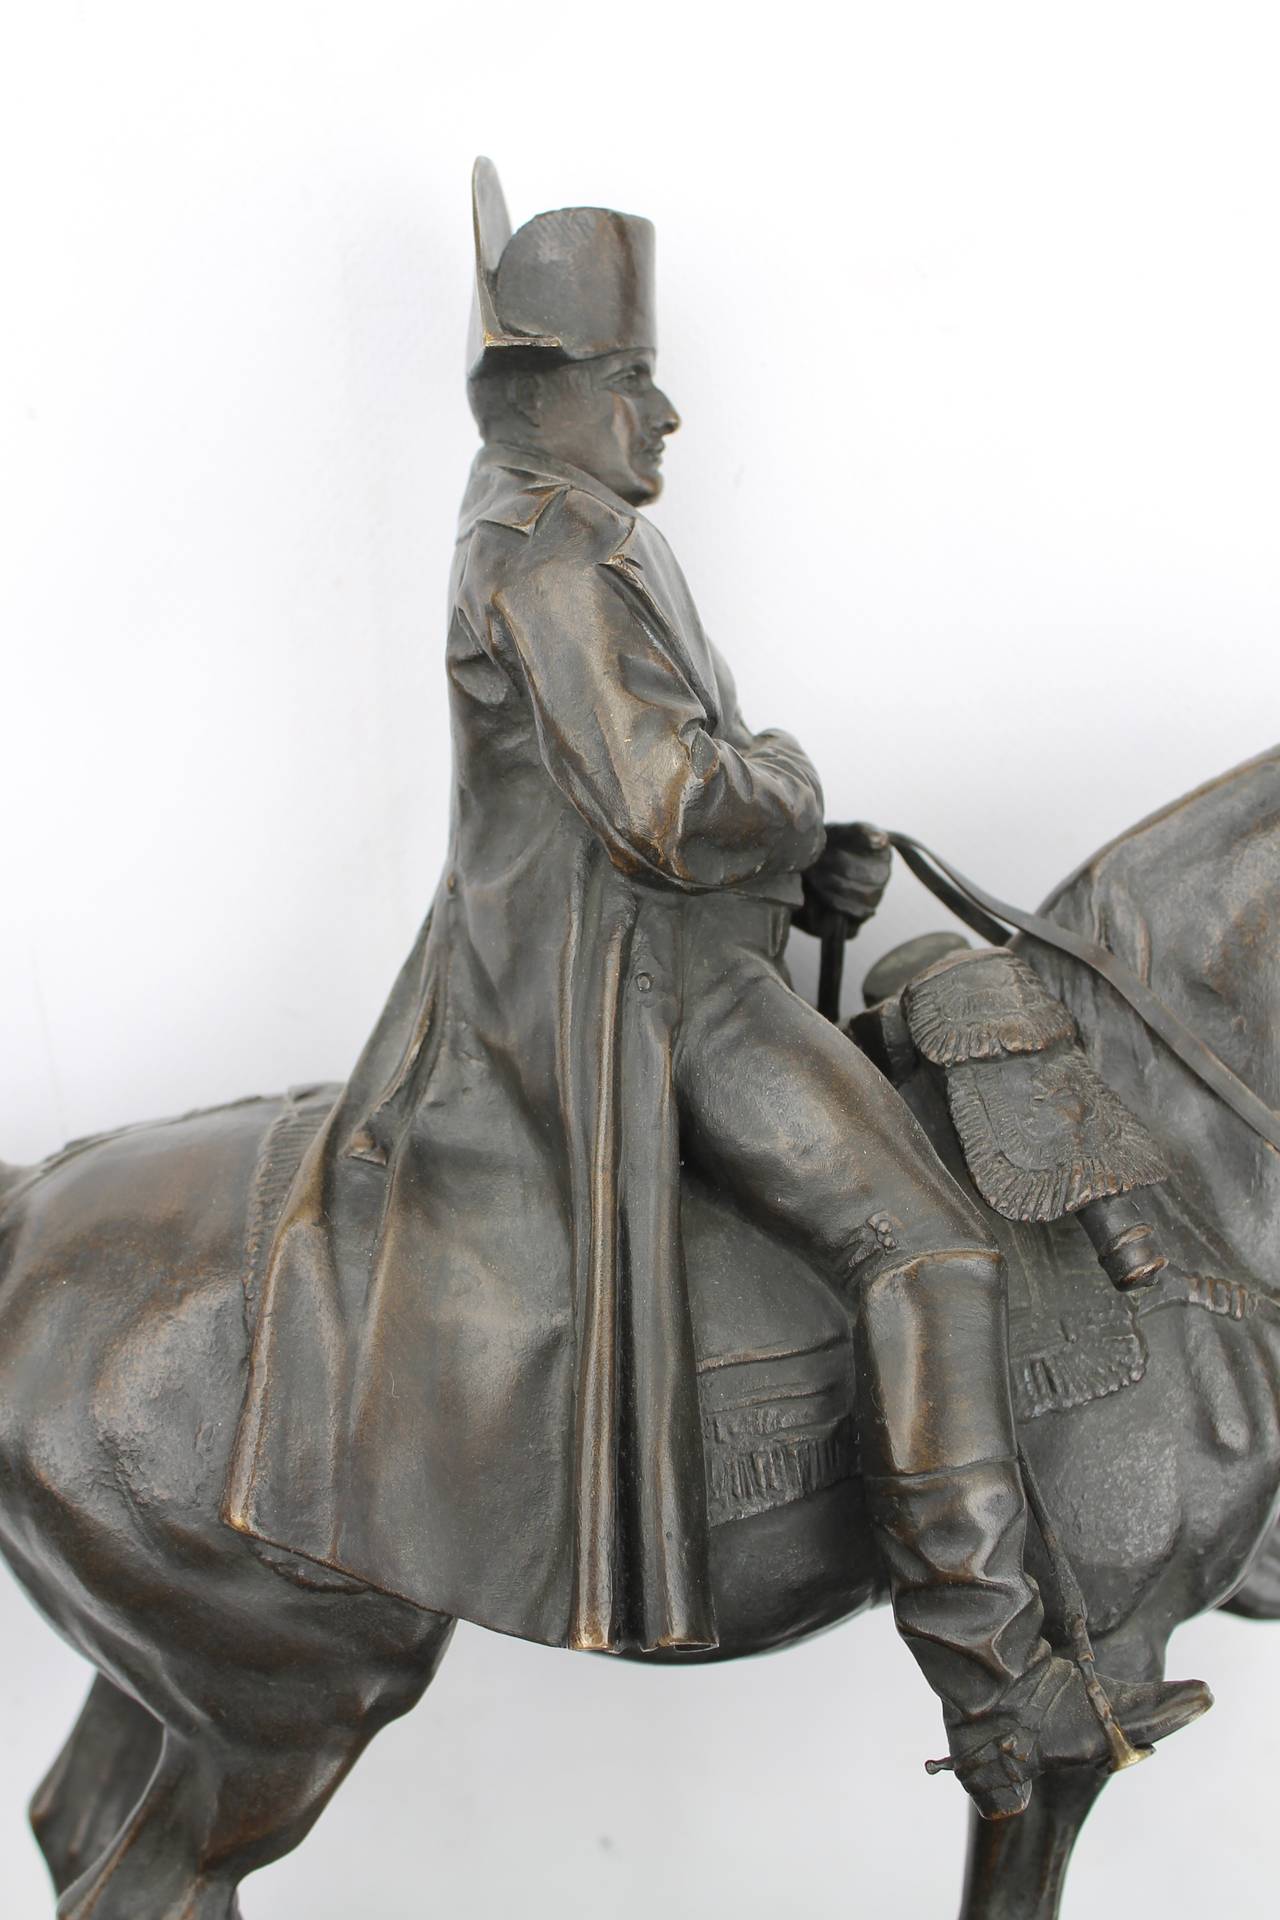 A very detailed bronze statue of Napoleon Bonaparte on Horseback. Signed by Emmanuel Fremiet (1824- 1910)

Born in Paris, he was a nephew and pupil of Sophie Fremiet, and later he became a pupil of her husband François Rude.[1] He chiefly devoted